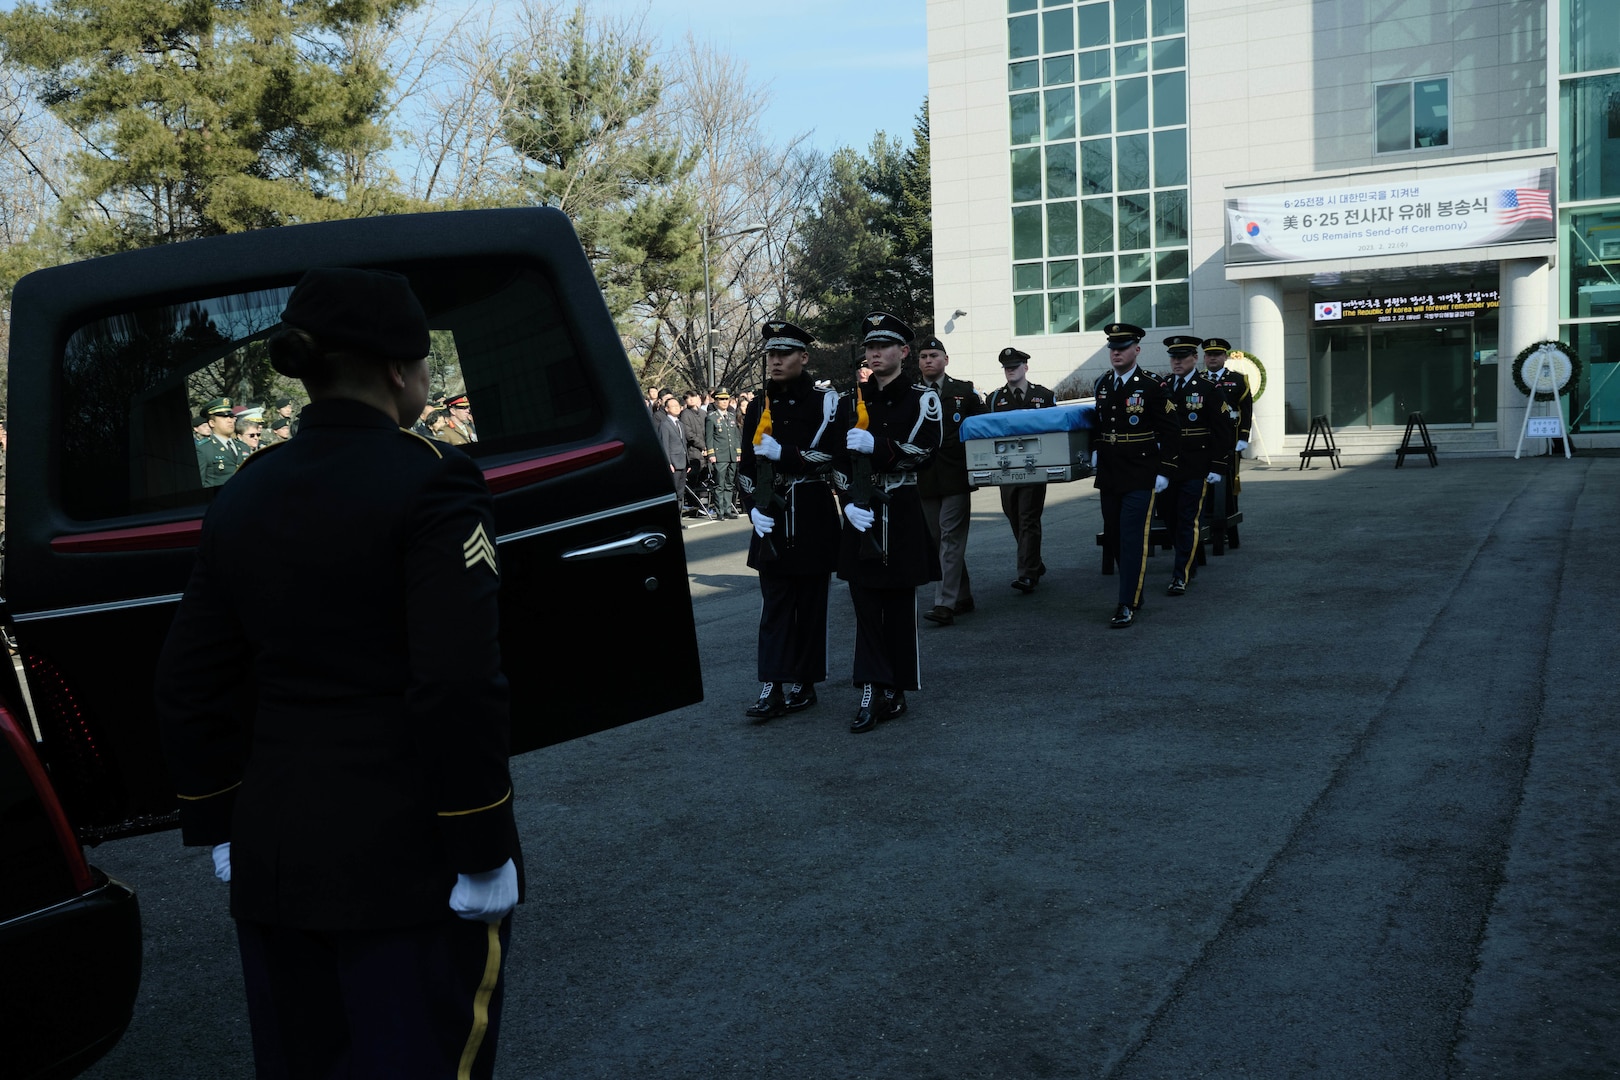 U.S. and Republic of Korea military and government officials conduct a repatriation ceremony at the Ministry of National Defense Agency for Killed in Action Recovery Identification (MAKRI) Headquarters in Seoul, Feb. 23, 2023.  Accepting the remains on behalf of the U.S., was Defense POW/MIA Accounting Agency Director, Mr. Kelly McKeague. The remains will be transported to the DPAA laboratory for further scientific analysis. There are currently more than 7,500 unaccounted for American service members from the Korean War. (U.S. Army photo by Sgt. 1st Class Corey Idleburg)